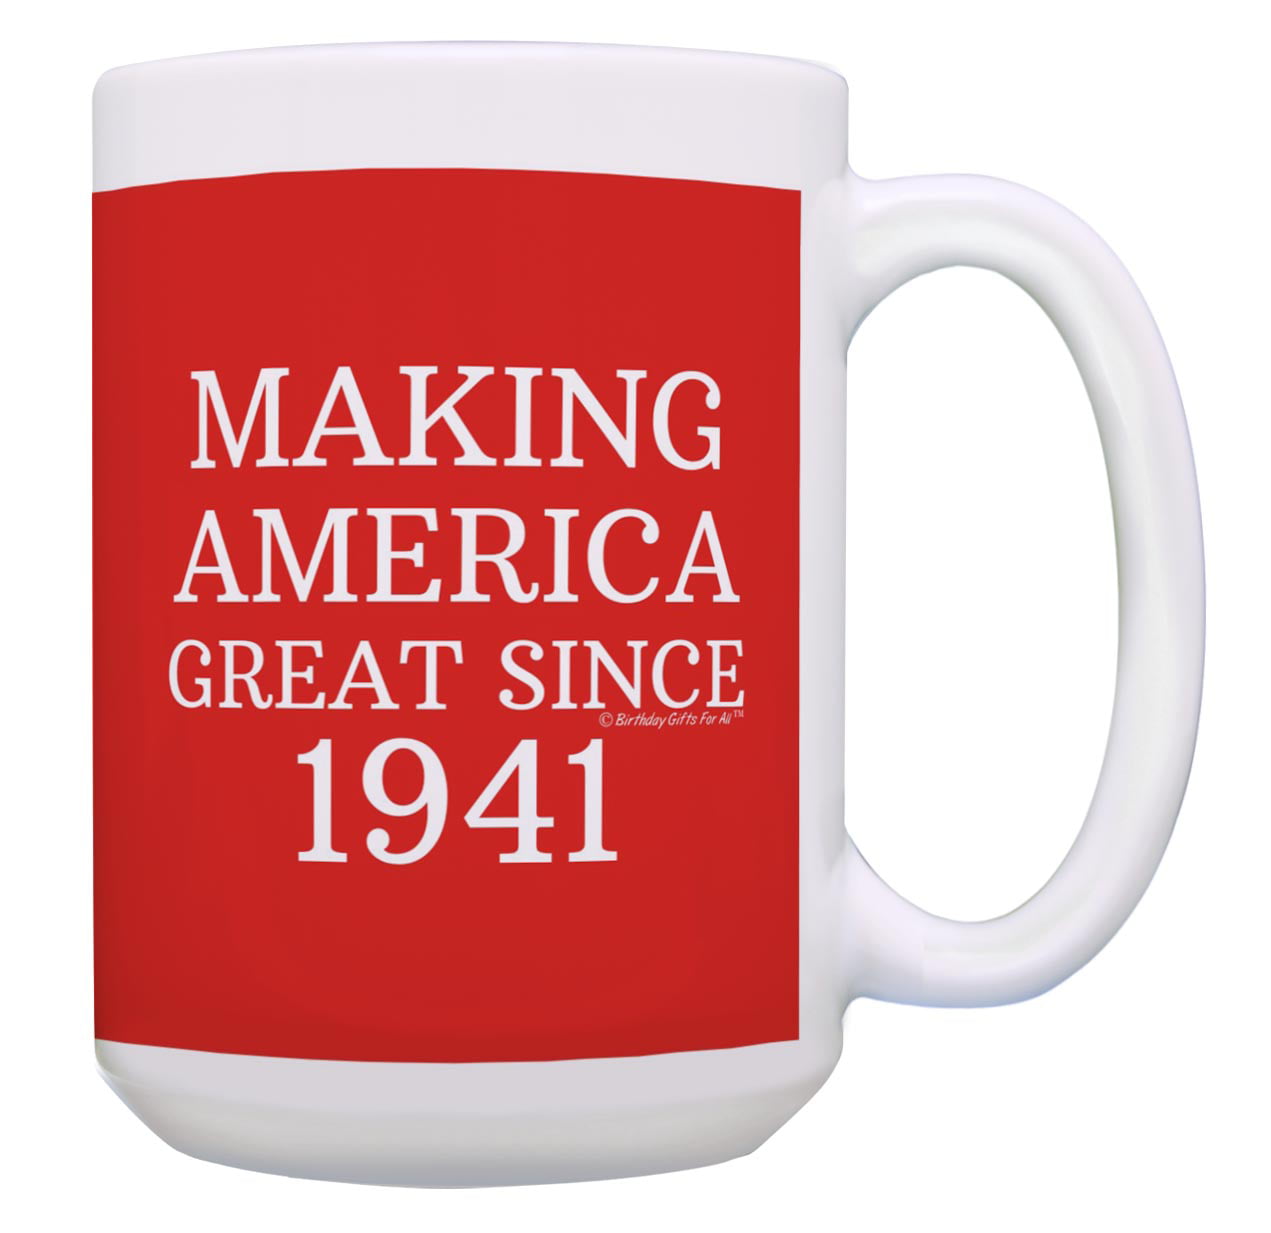 80th Birthday Gifts For All Making America Great Since 1941 Funny Birthday Gift Birthday Coffee Mug 80th Birthday Mug For Men Or Women 15 Oz Coffee Mug Tea Cup 15 Oz Red